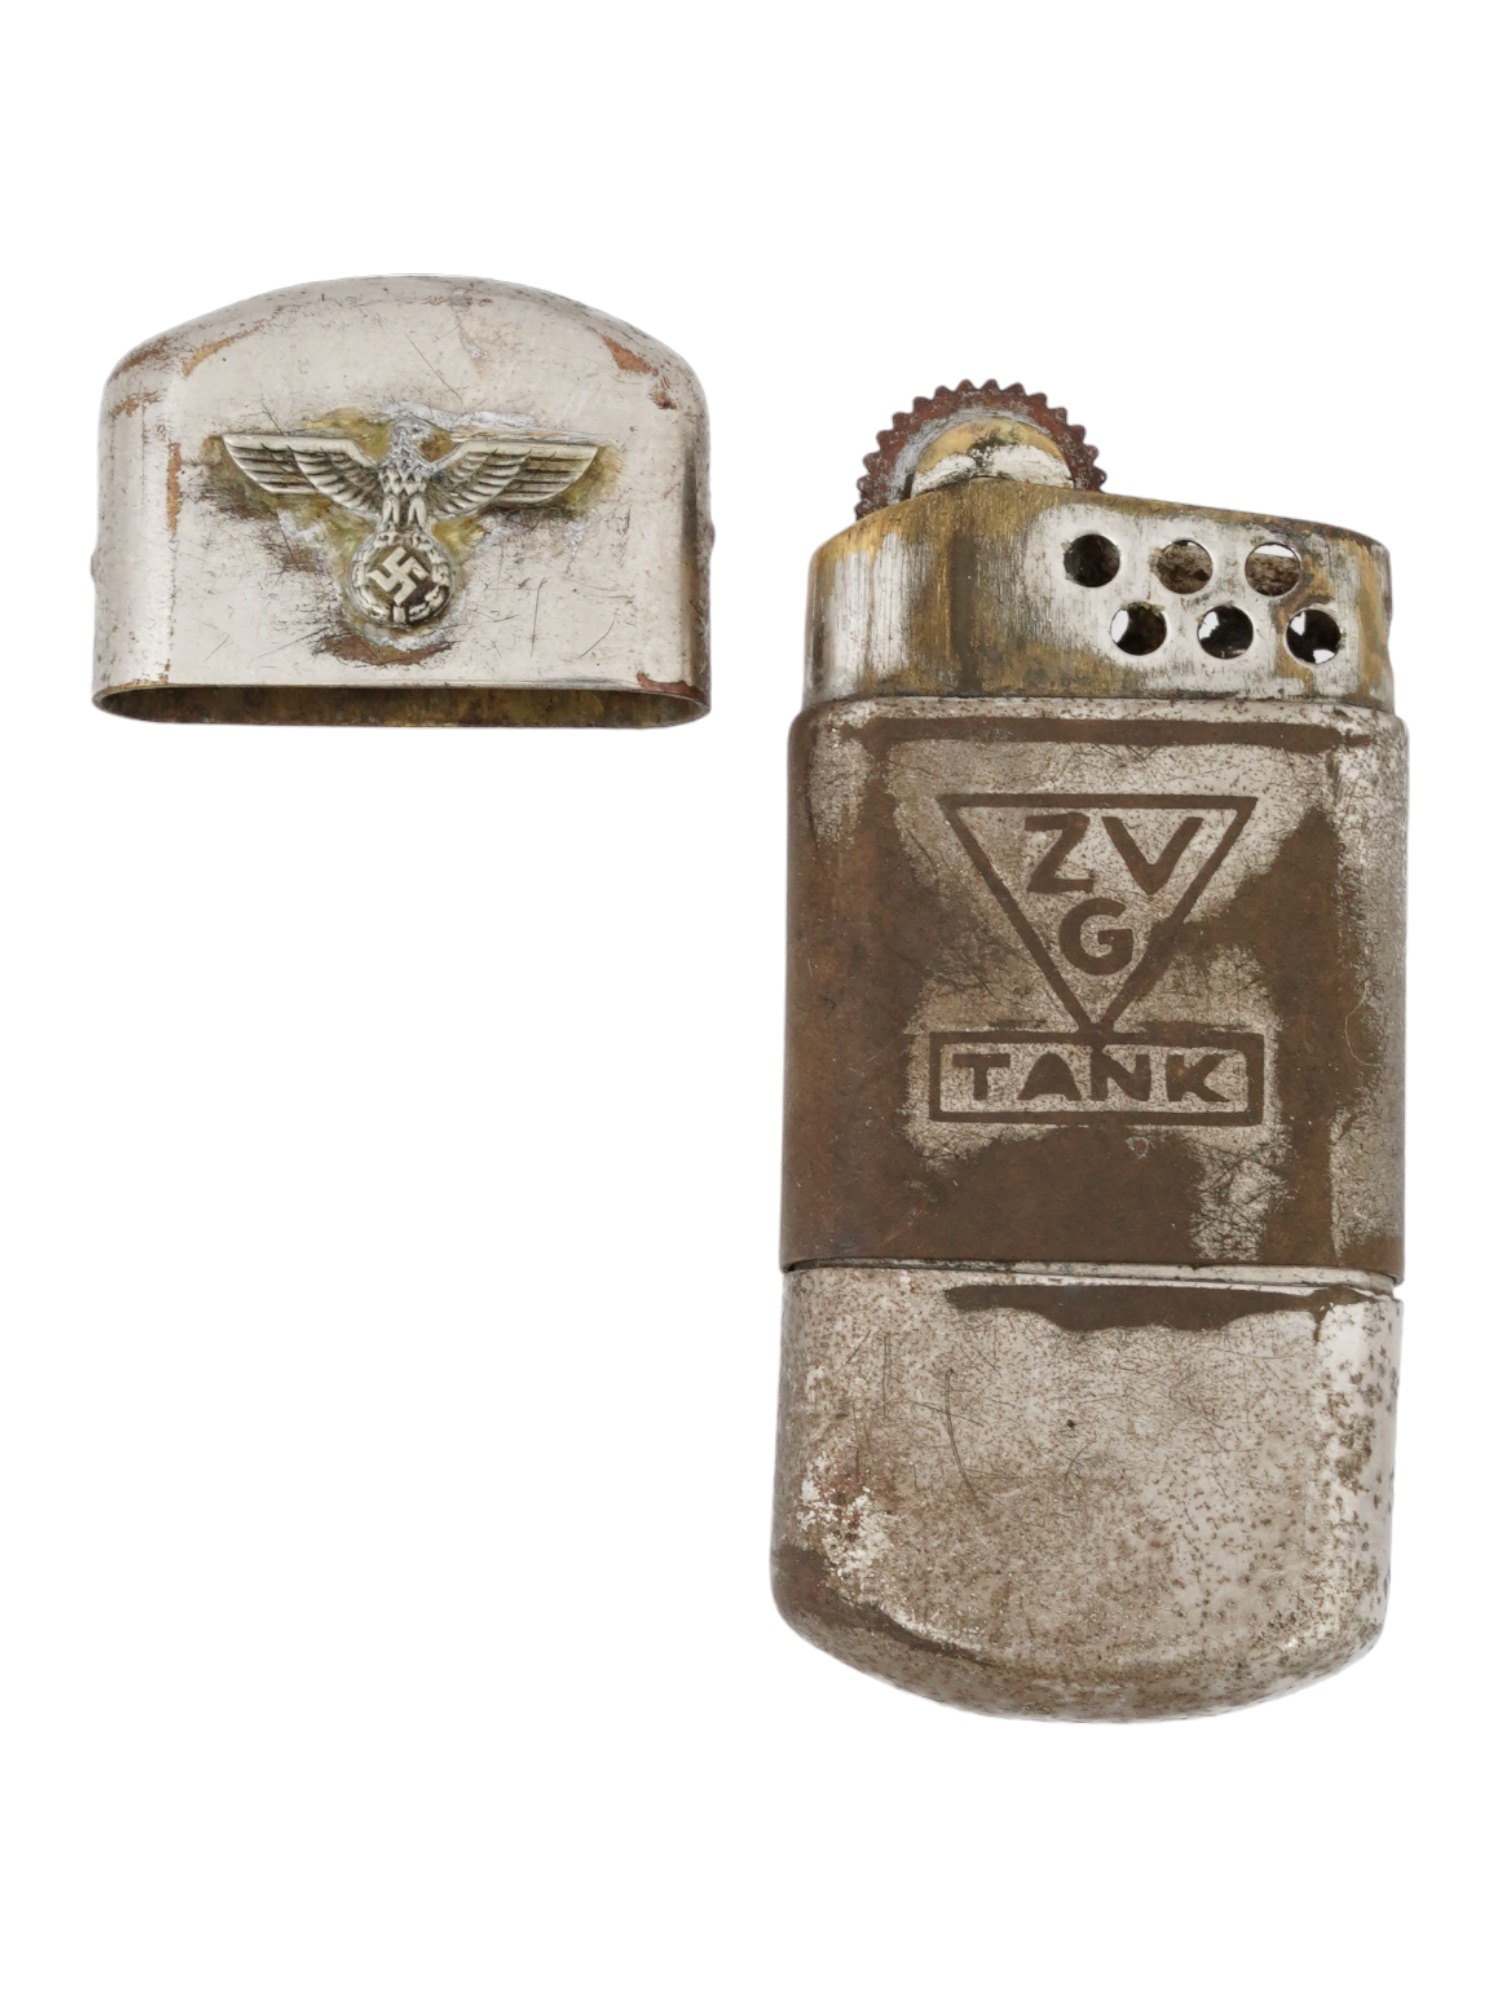 WWII NAZI GERMAN HEER ARMY CIGARETTE LIGHTER PIC-3